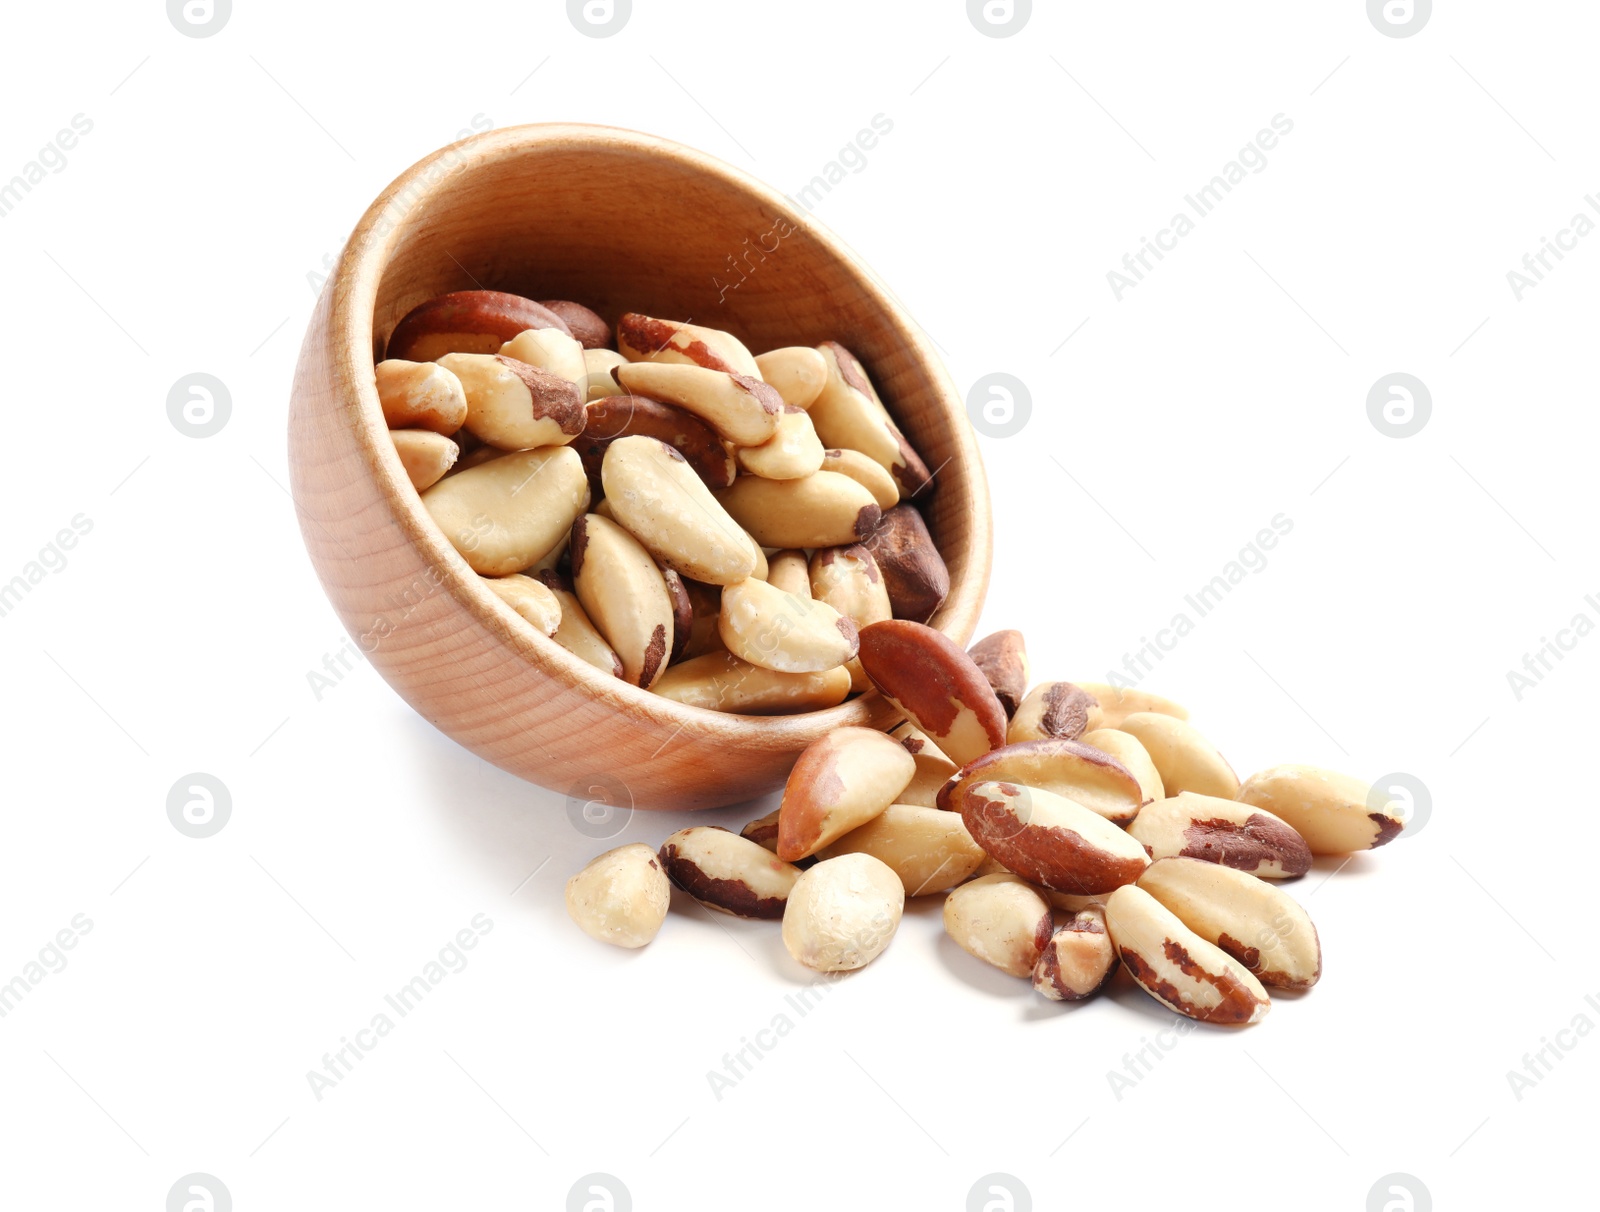 Photo of Wooden bowl with Brazil nuts on white background